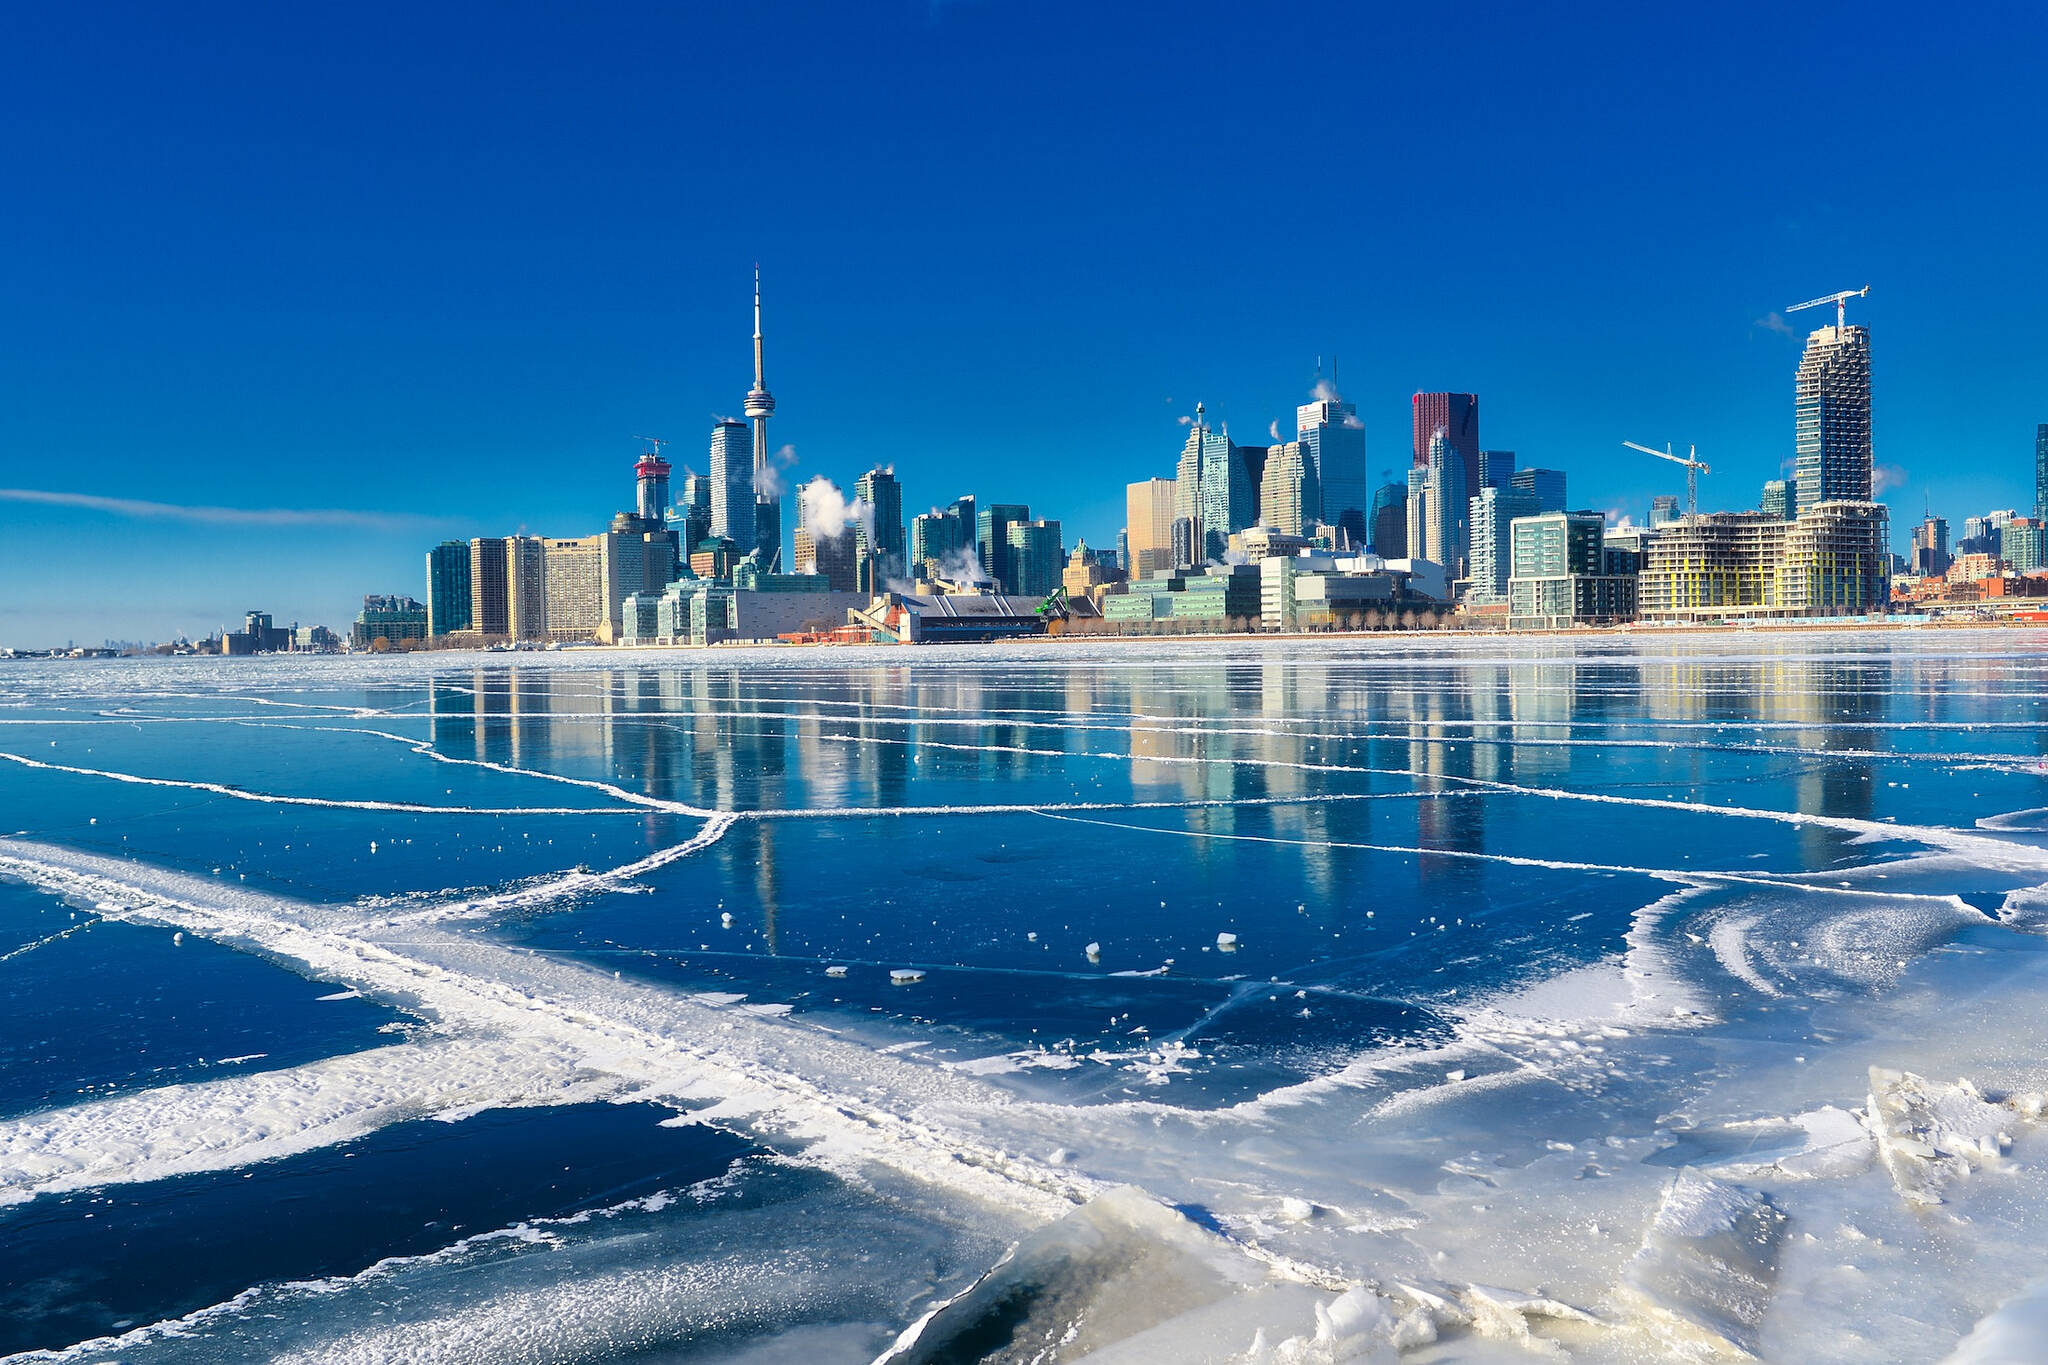 It's going to feel like 38C in Toronto as city marks coldest day of